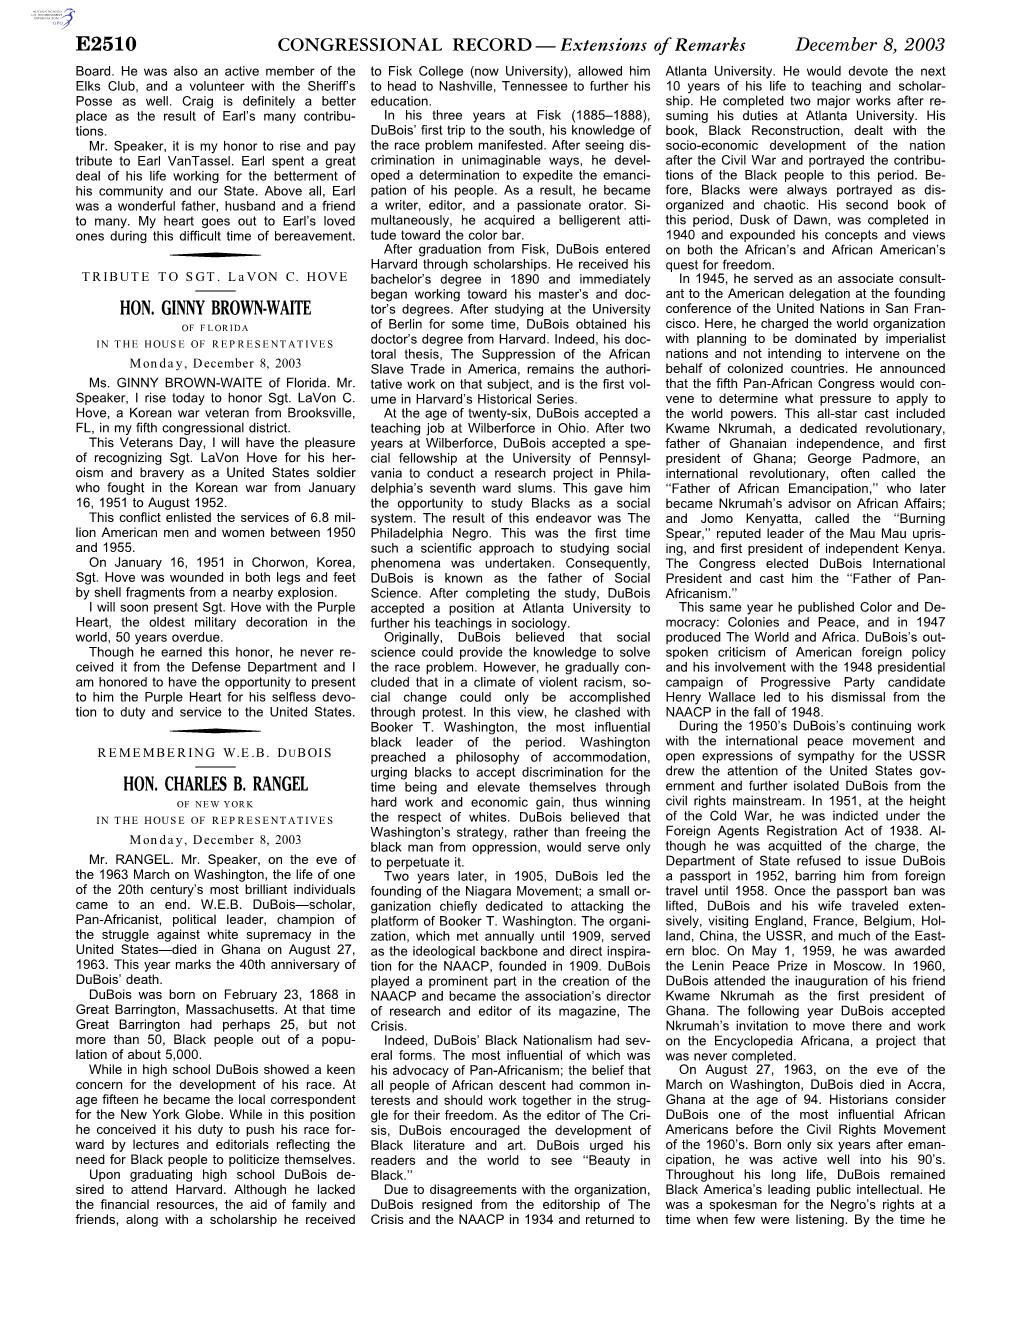 CONGRESSIONAL RECORD— Extensions of Remarks E2510 HON